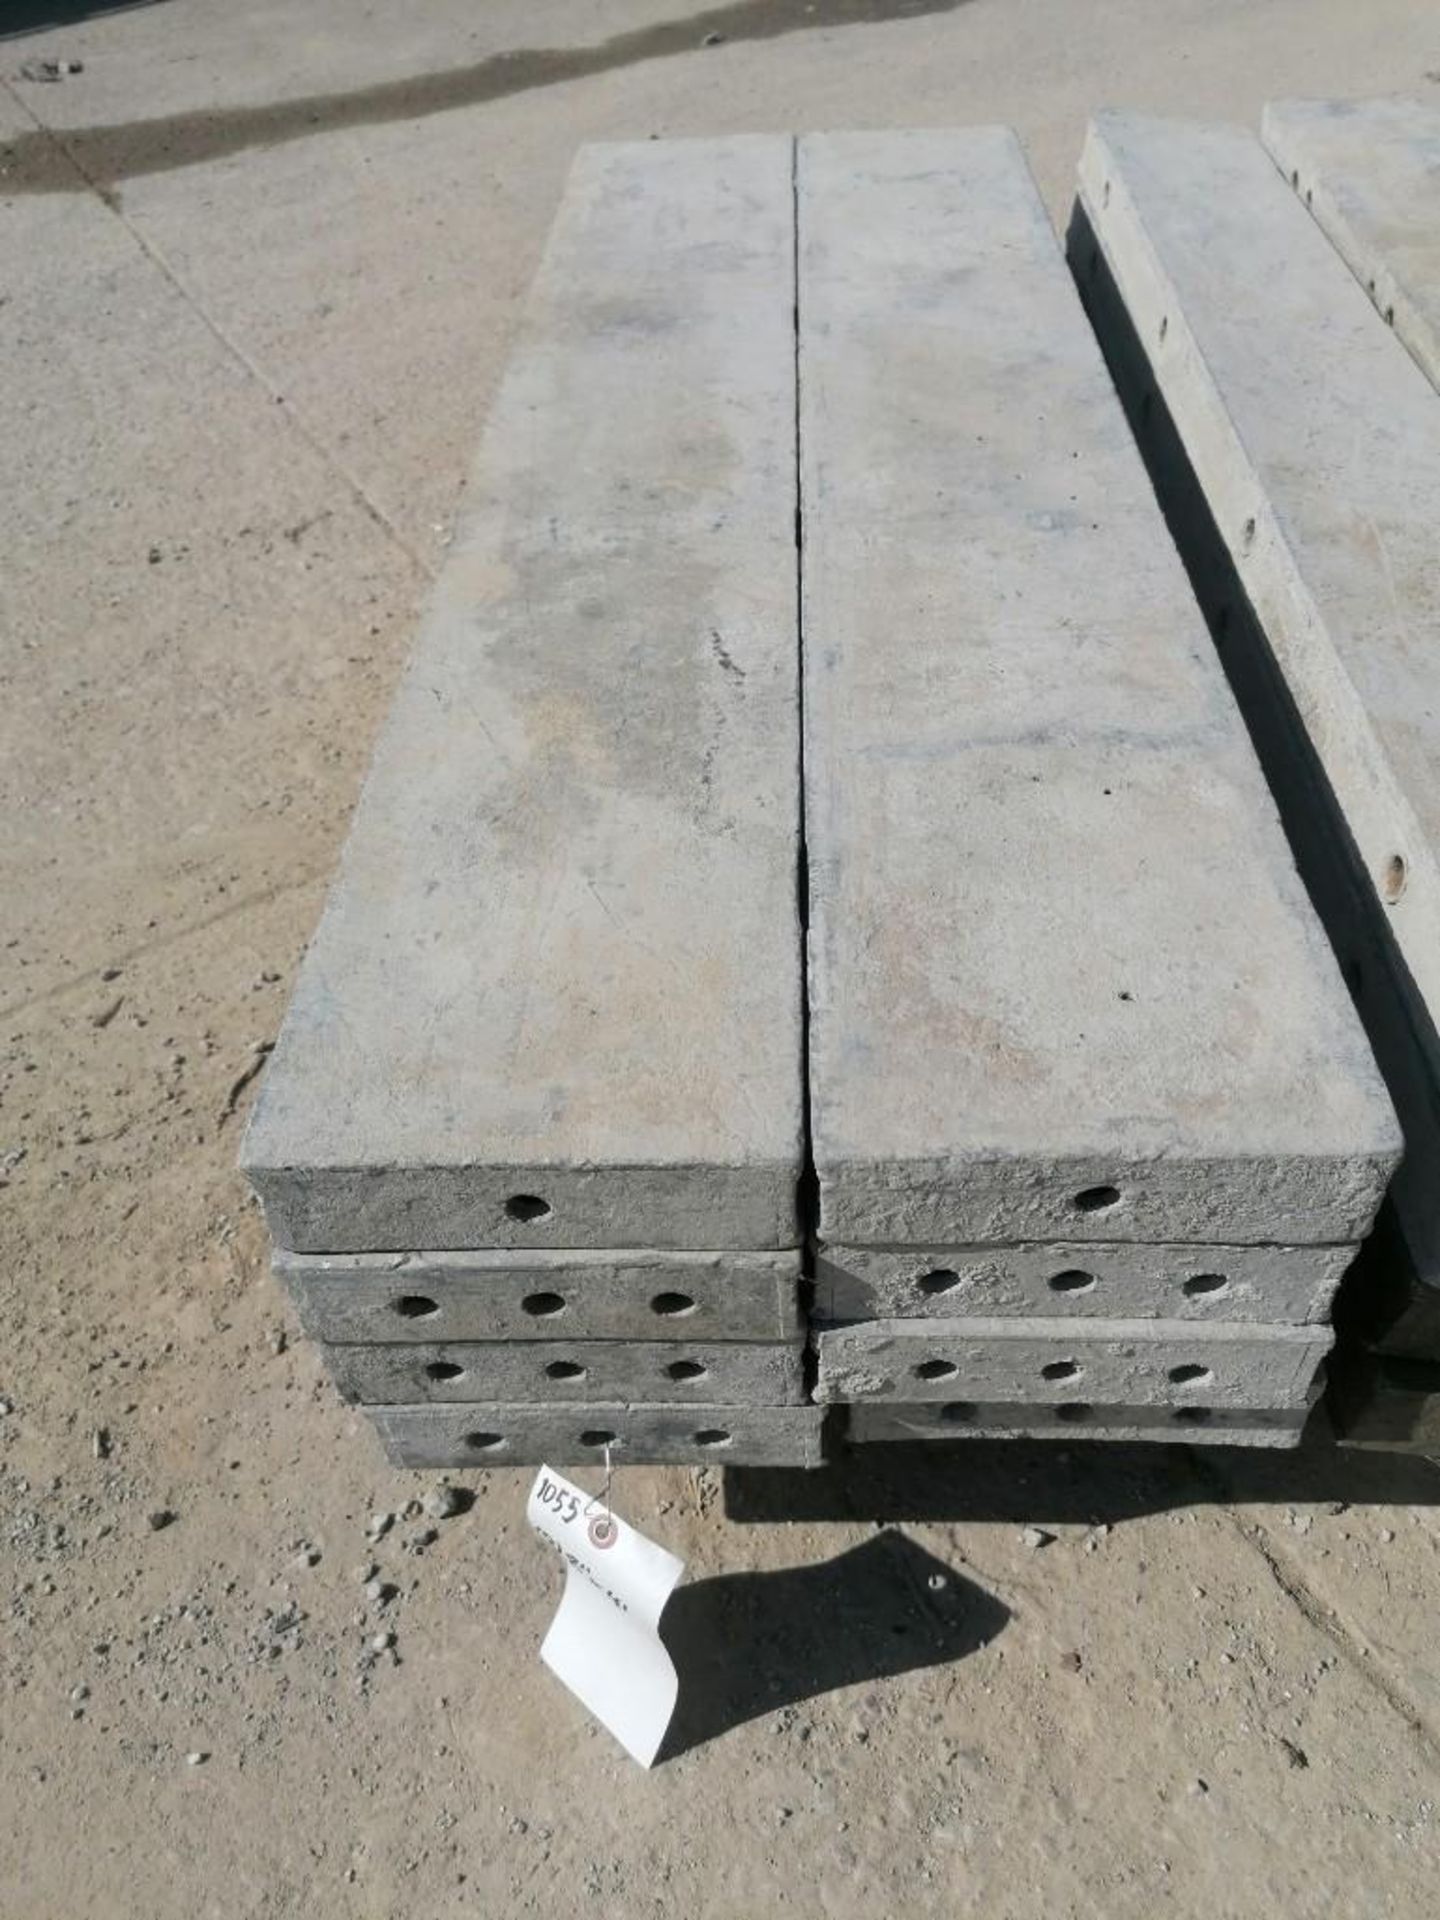 (8) 8" x 4' Wall-Ties Smooth Aluminum Concrete Forms 6-12 Hole Pattern. Located in Mt. Pleasant,